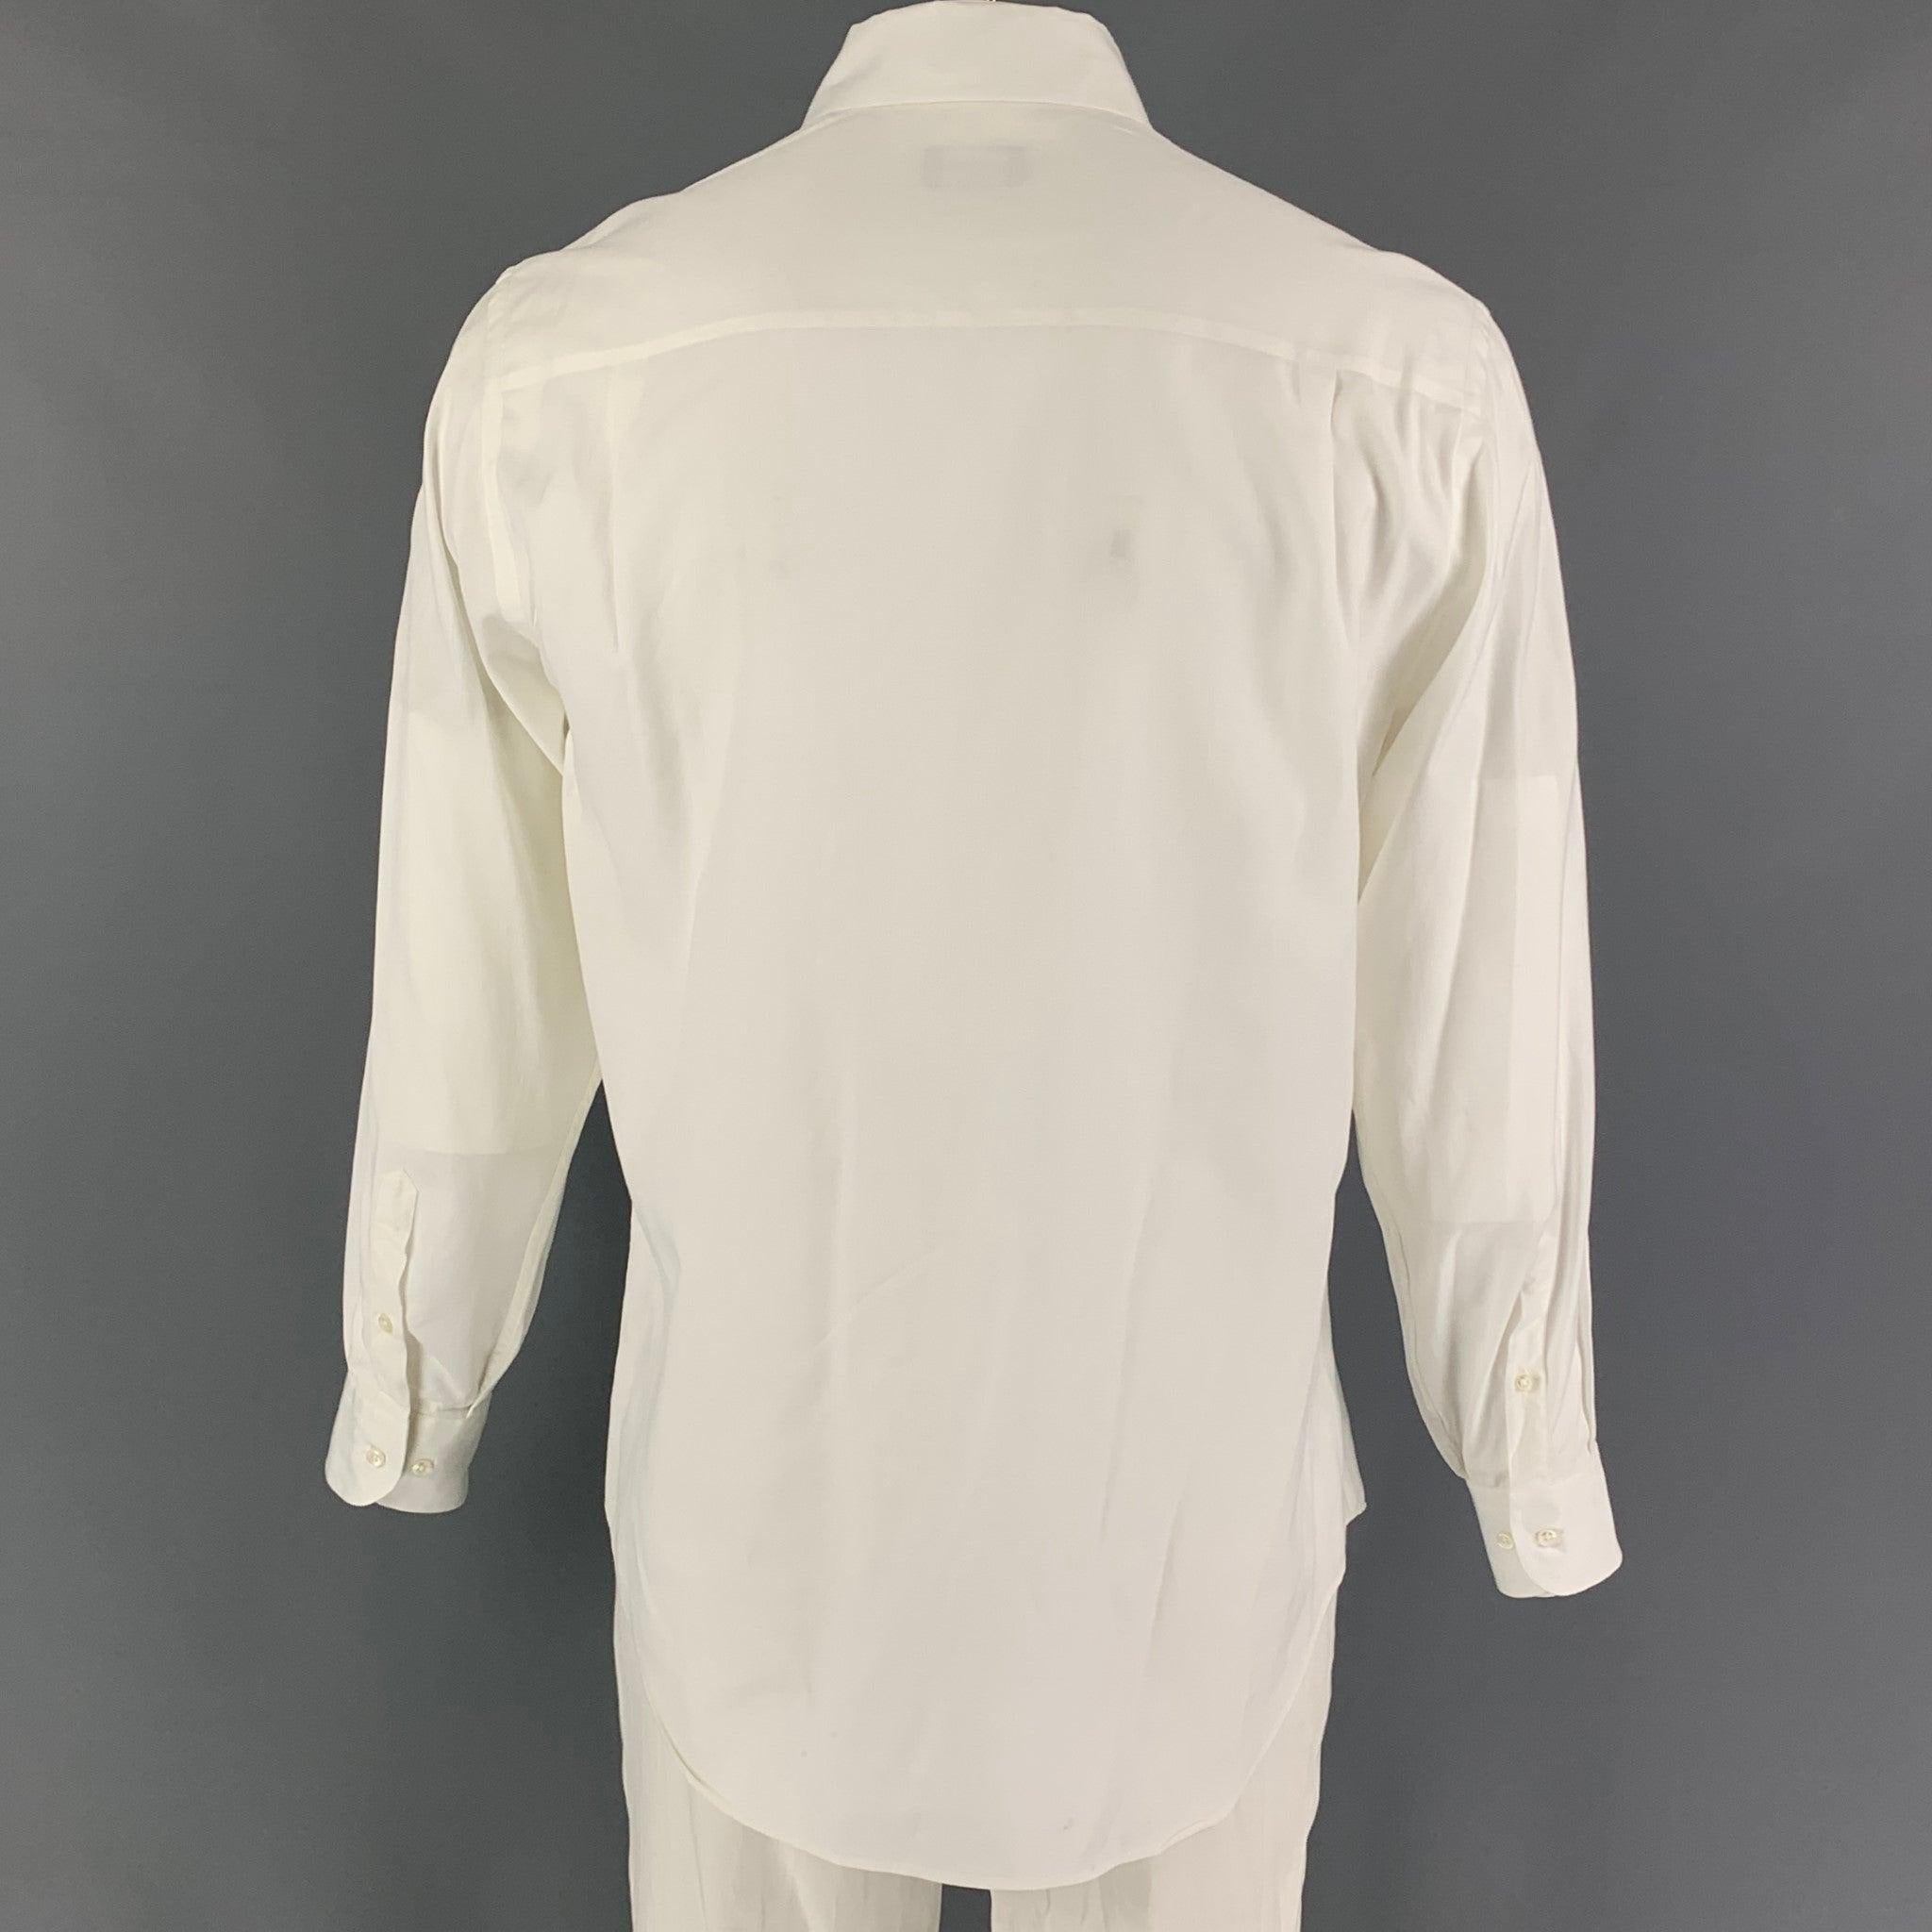 GIORGIO ARMANI Size M White Cotton Button Up Long Sleeve Shirt In Good Condition For Sale In San Francisco, CA